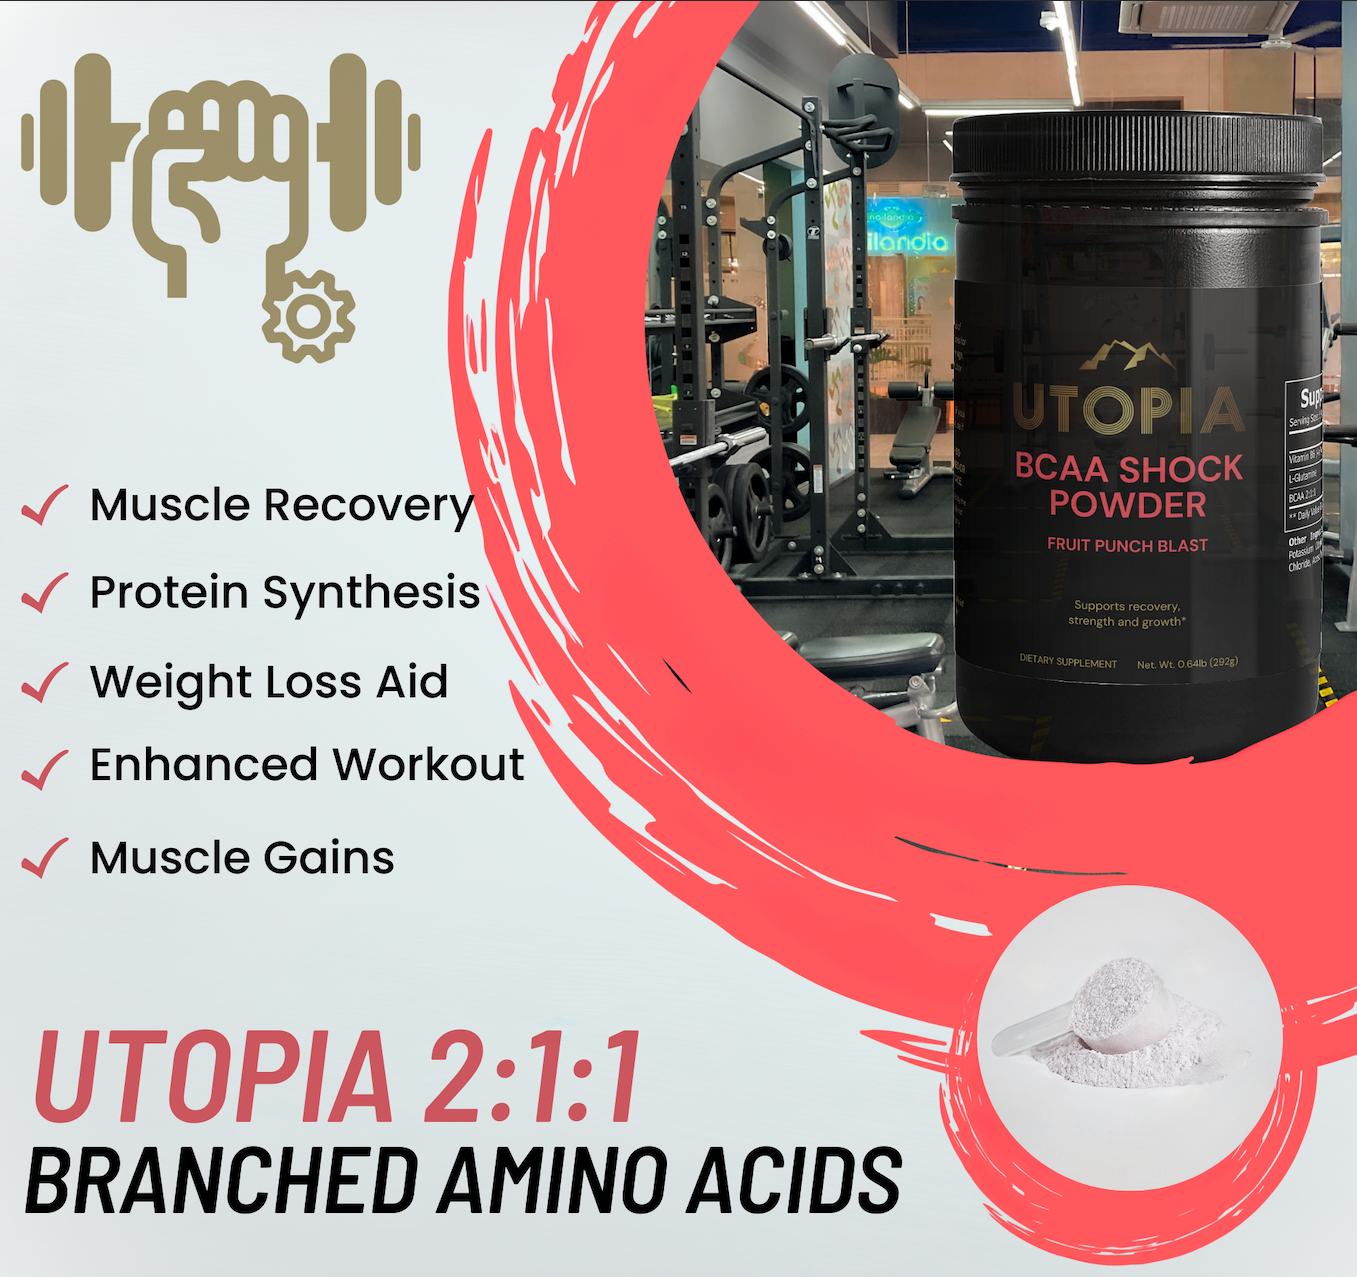 Utopia - BCAA Shock Powder - (45 Servings) - Protein Synthesis for Lean Muscle Growth & Weight Reduction - Fruit Punch Flavor